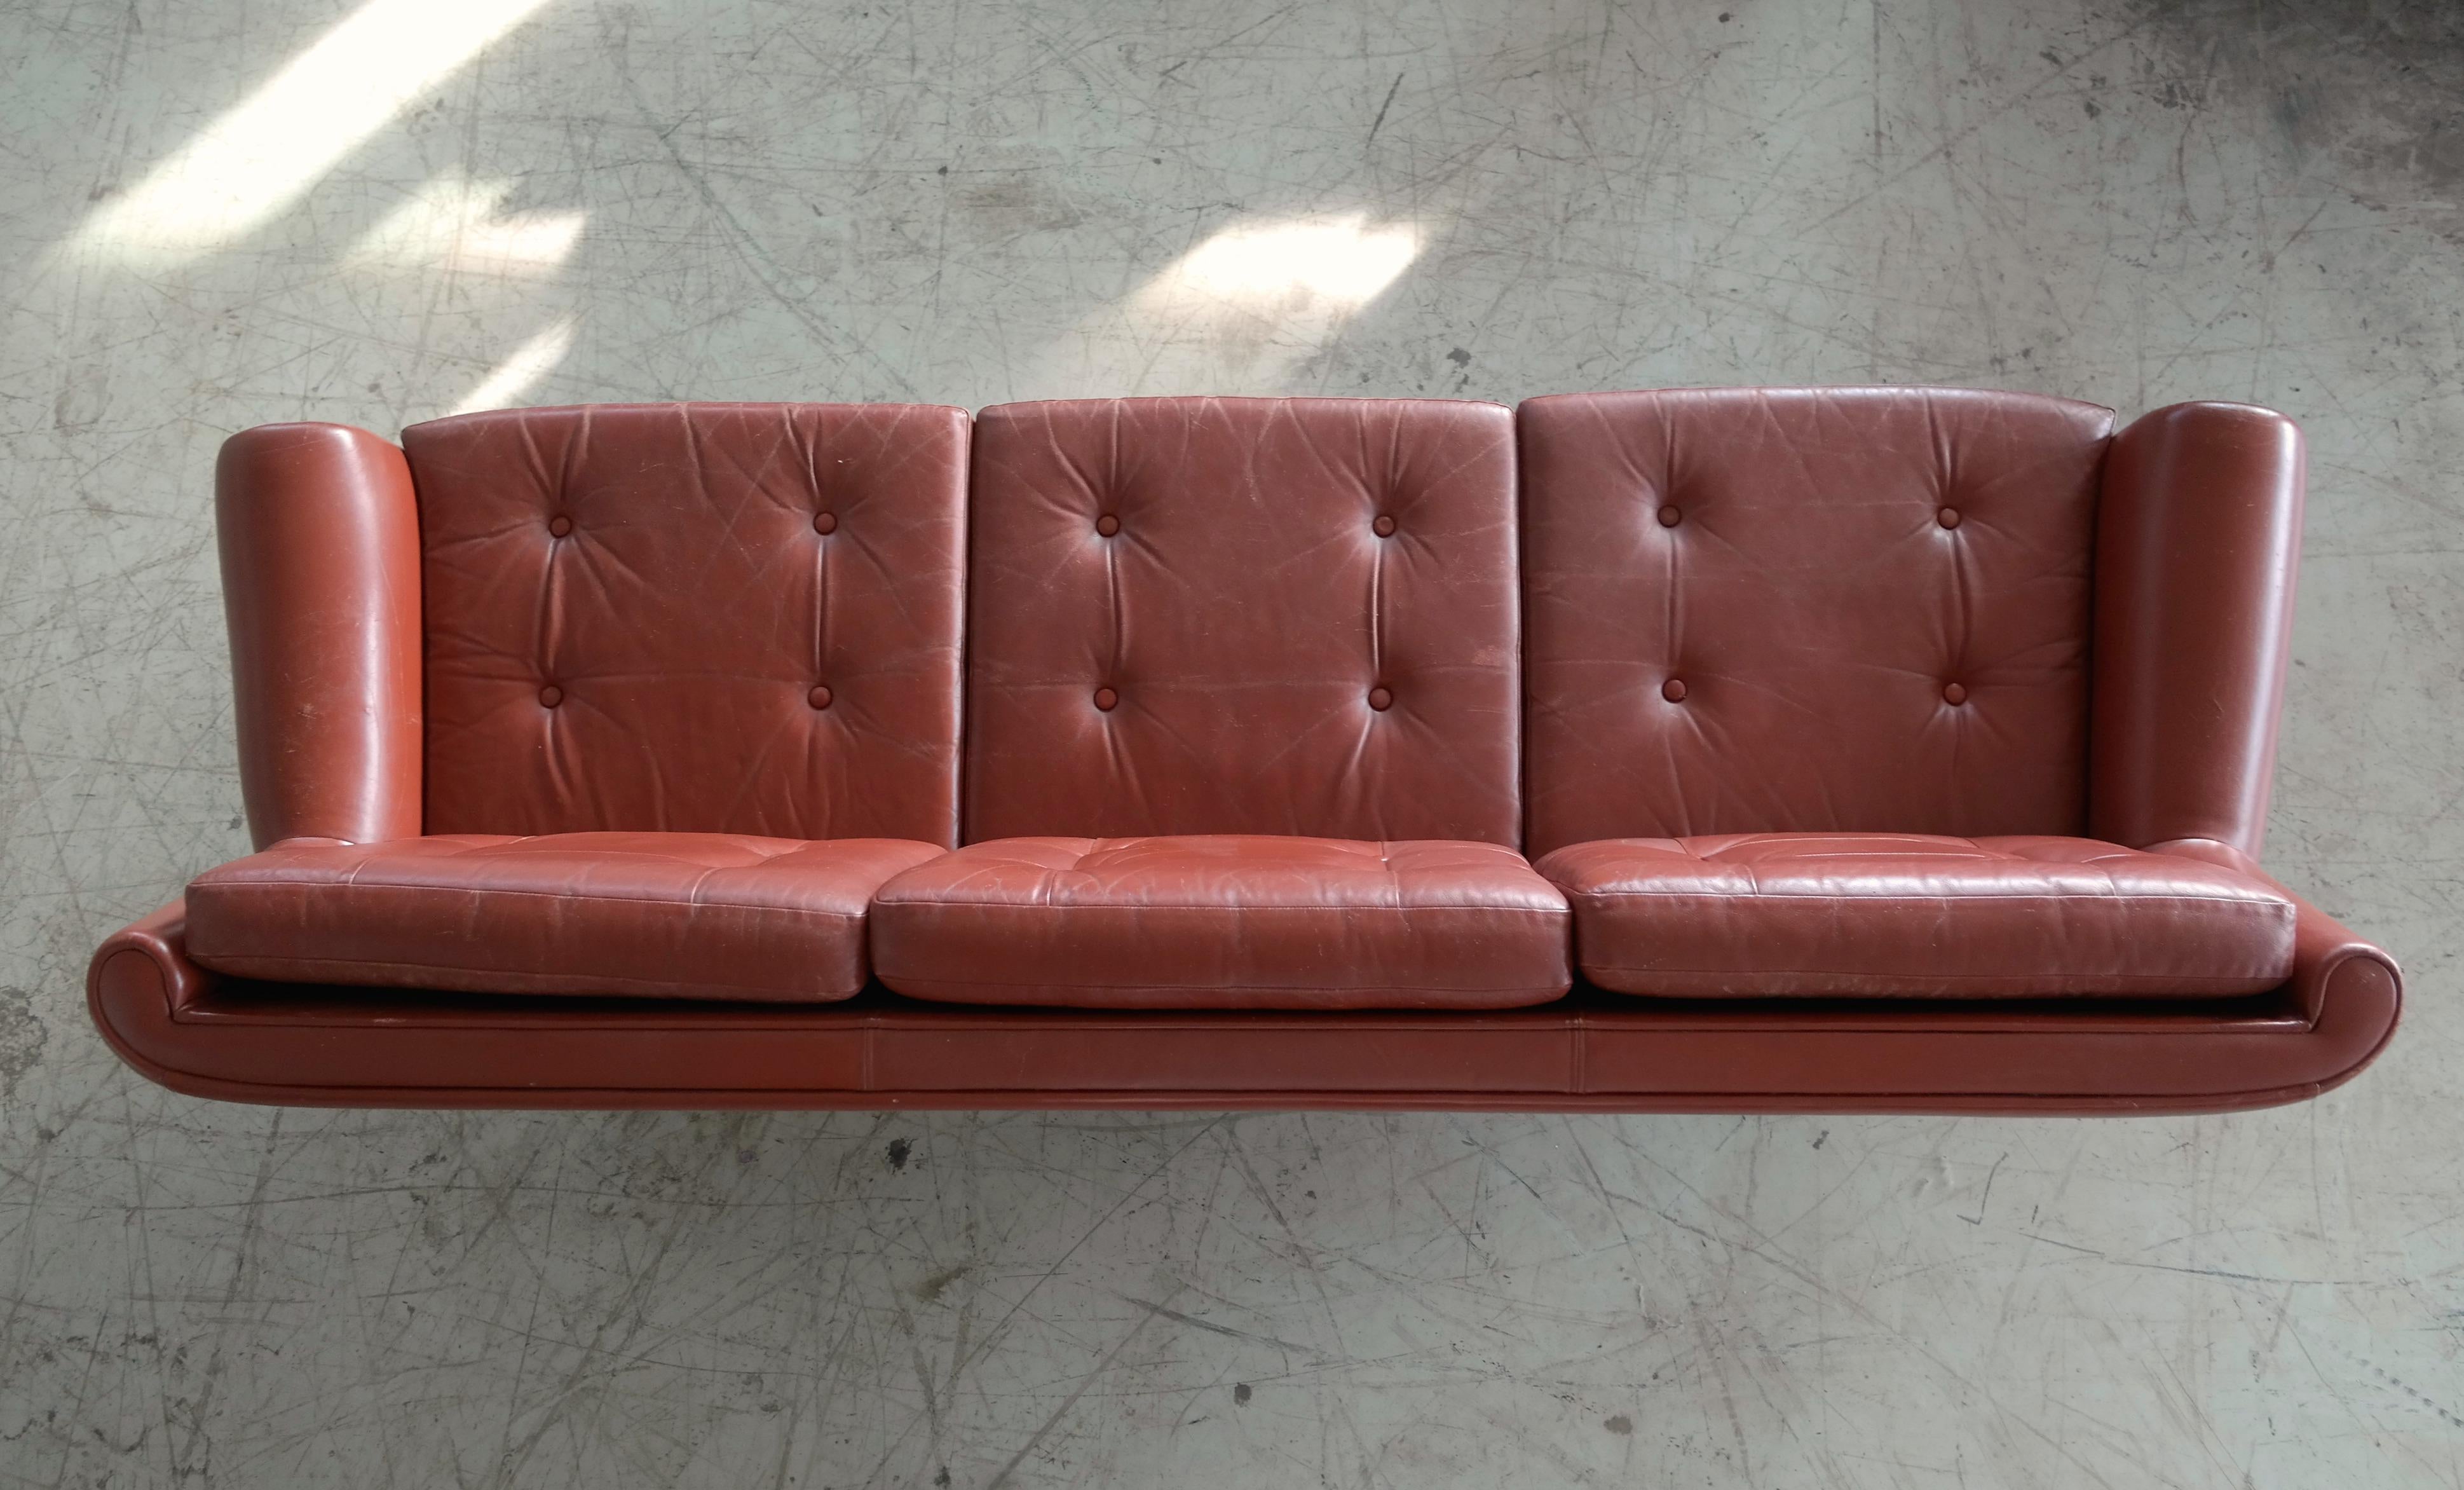 Mid-20th Century Danish Midcentury Airport Style Leather Sofa with Metal Legs by Skjold Sorensen